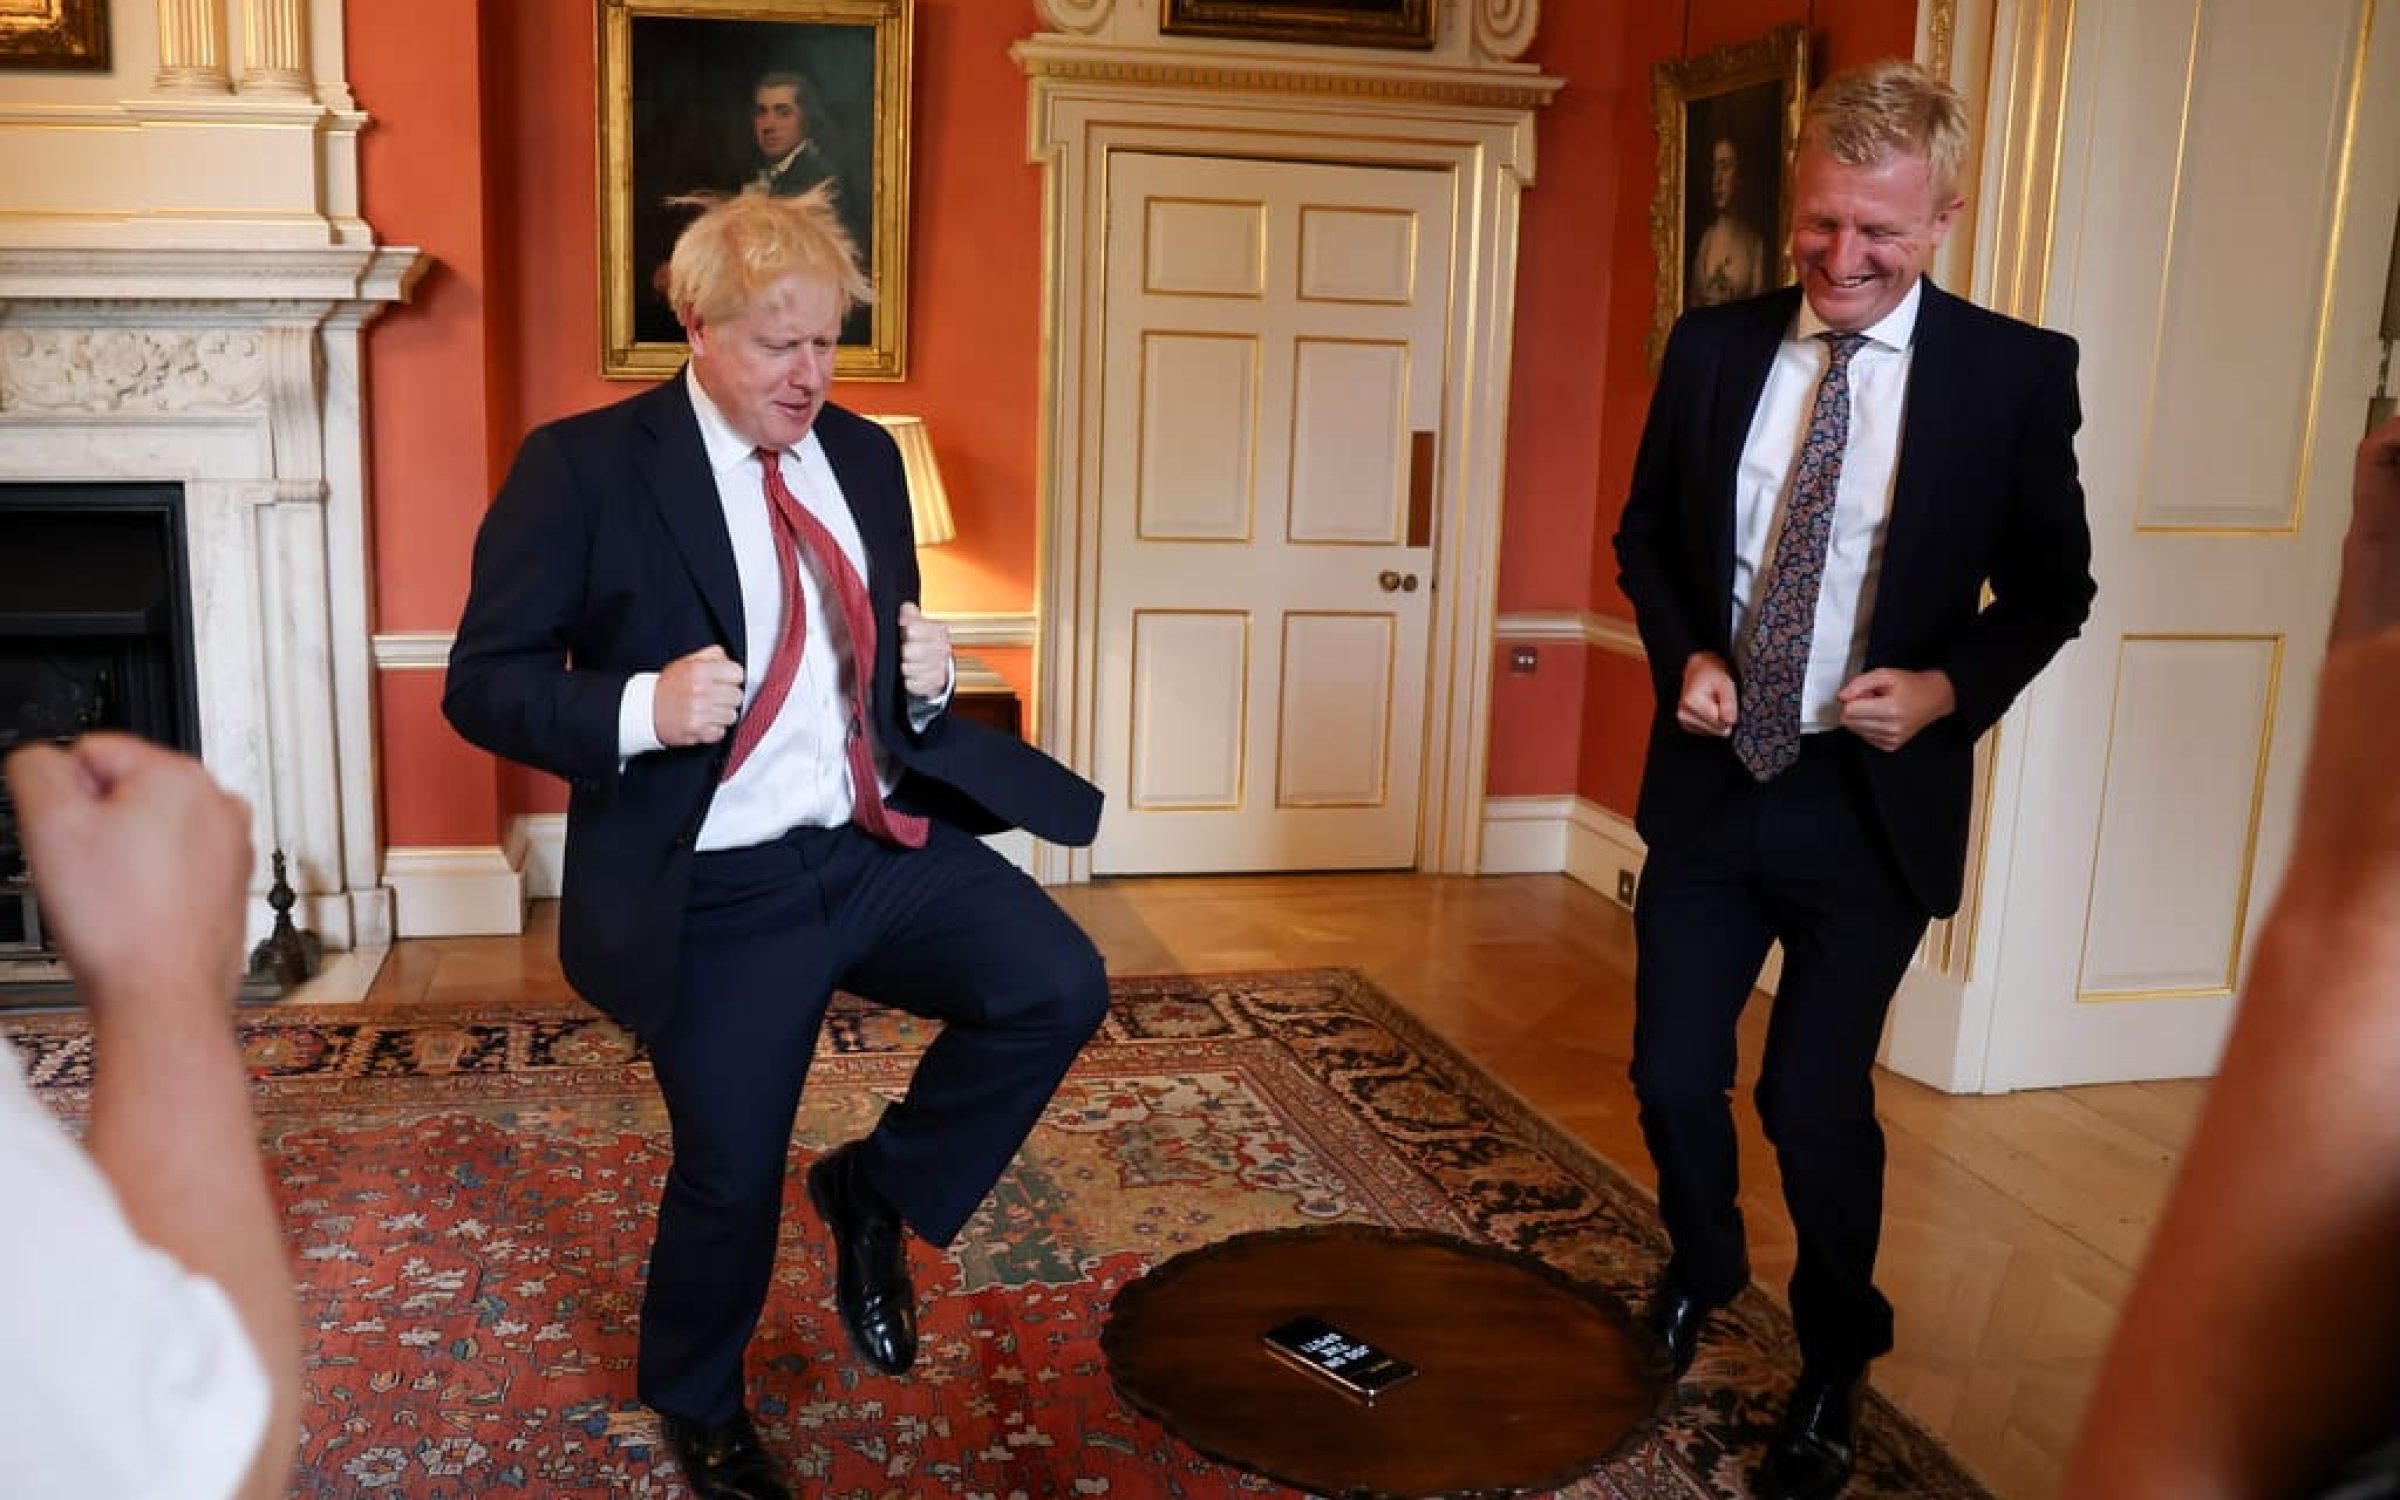 Boris Johnson and Oliver Dowden, the former Conservative party chairman.